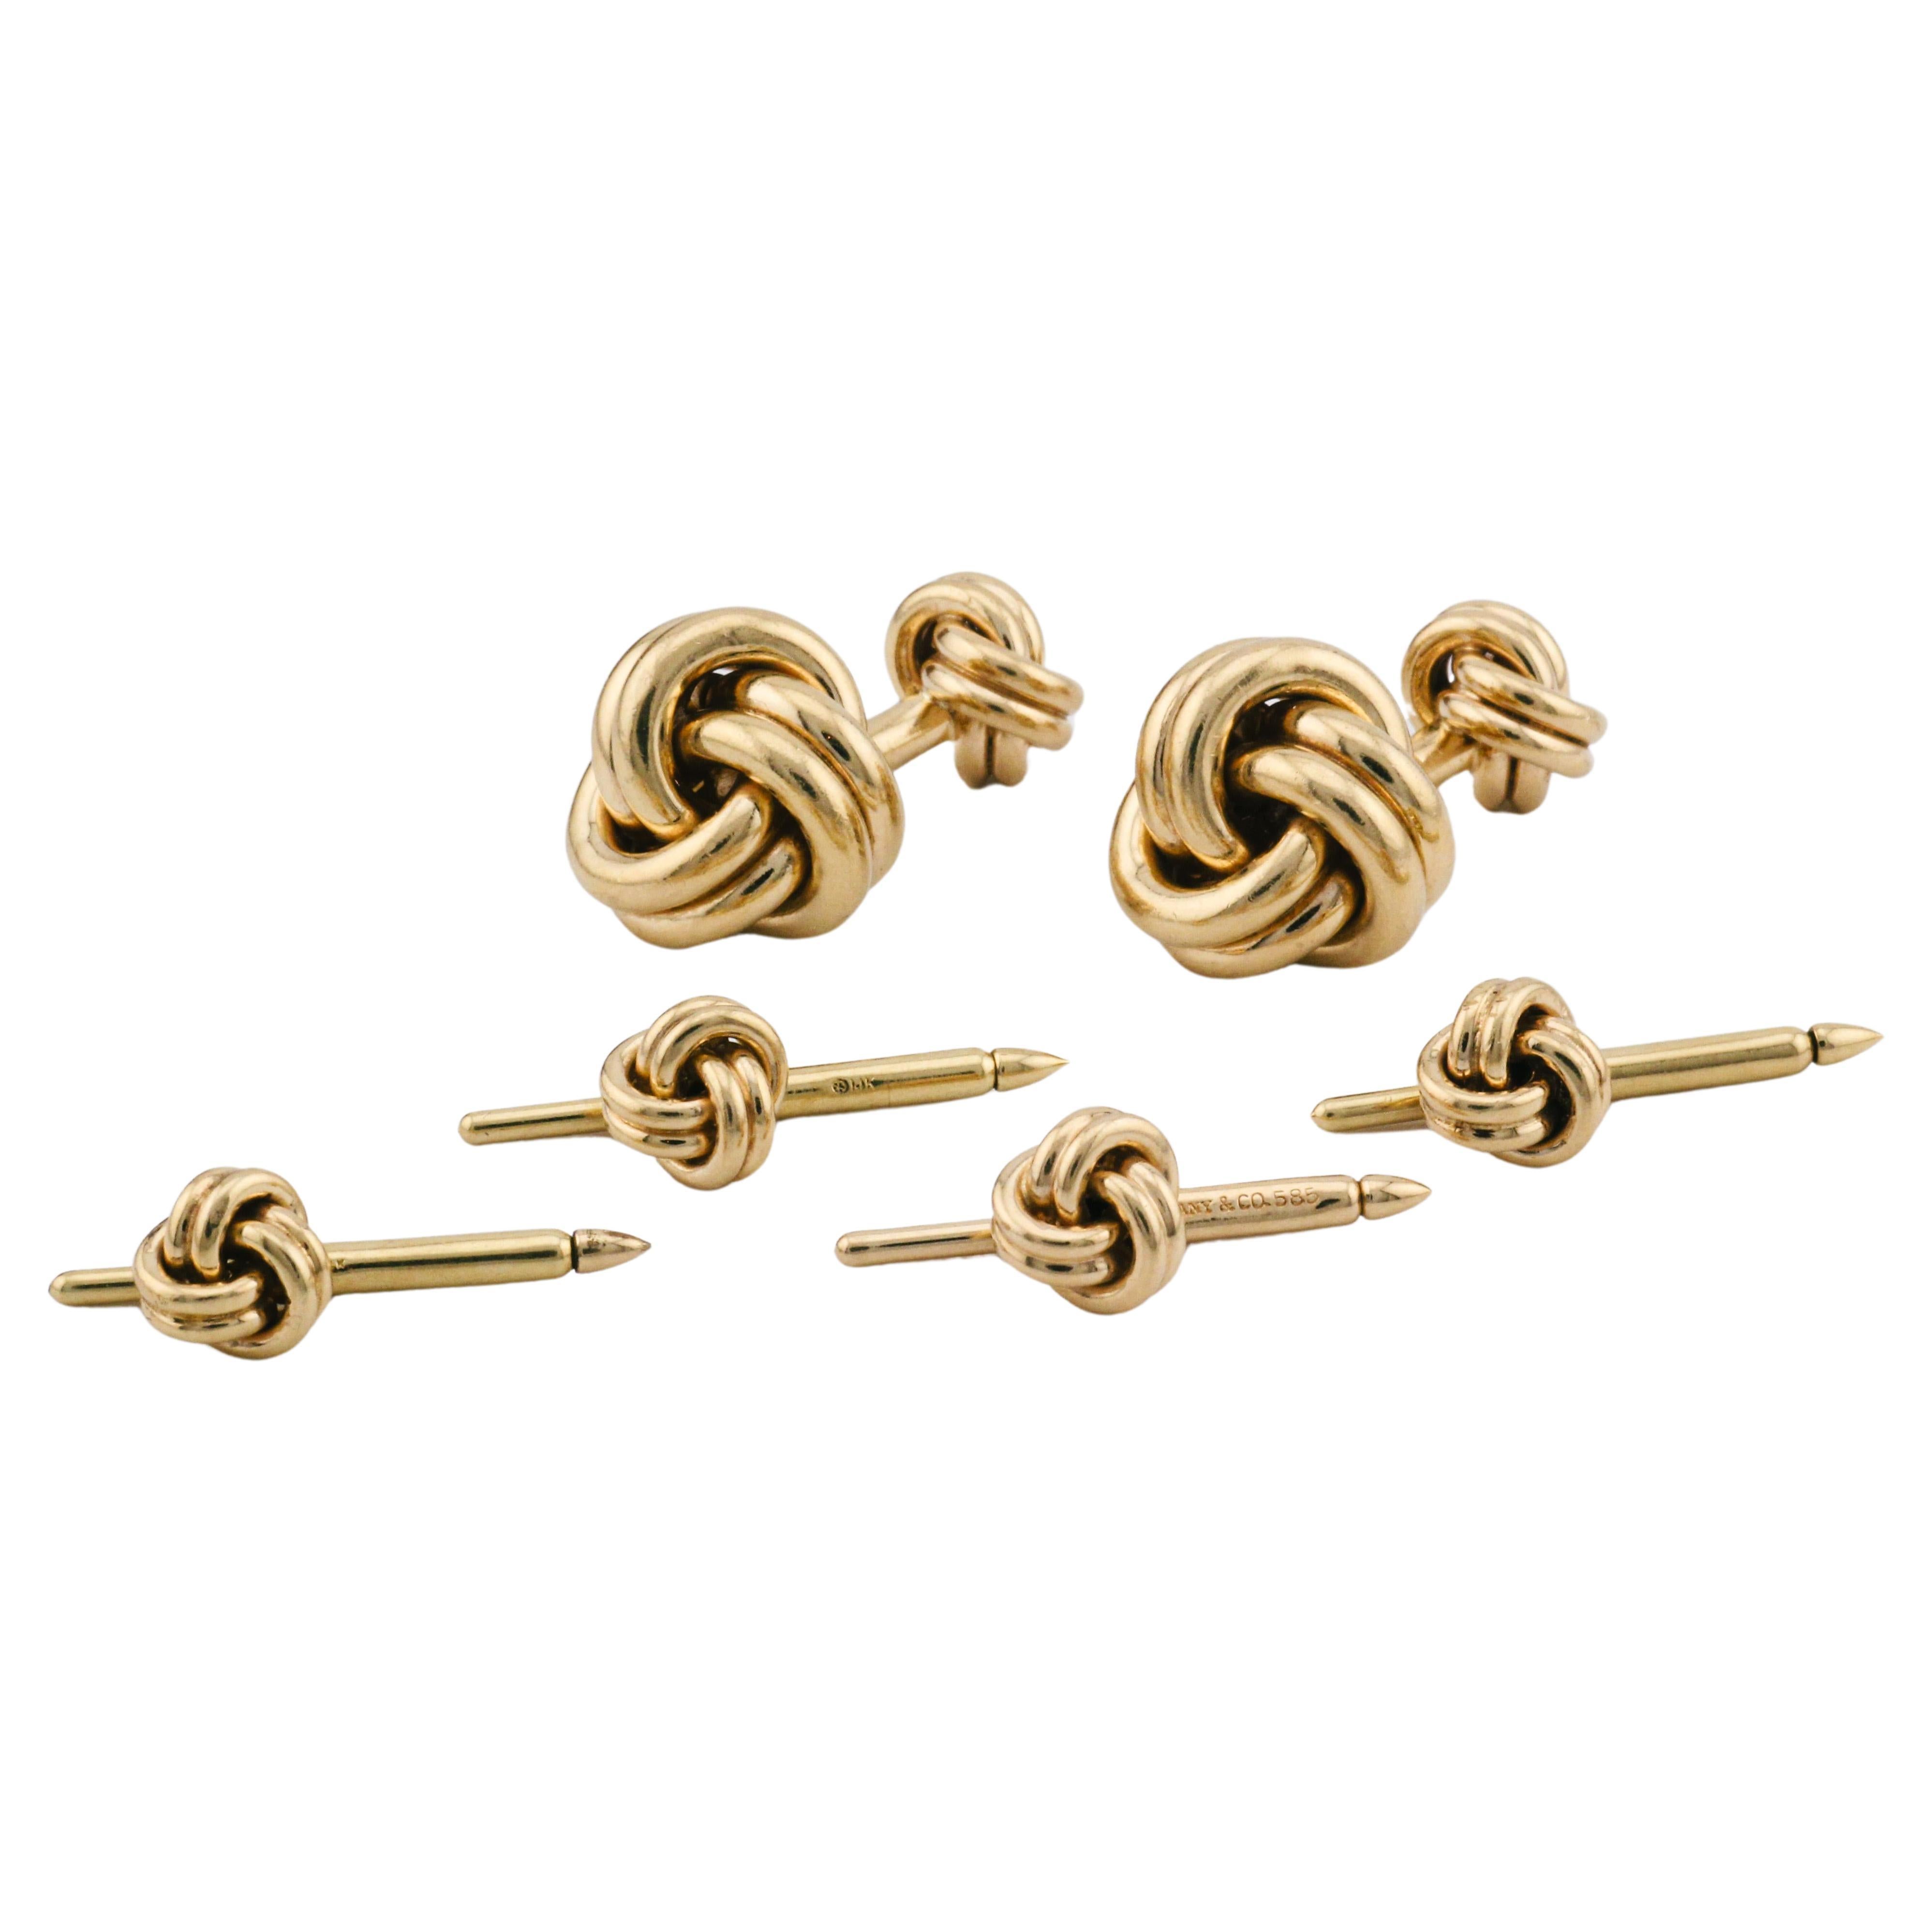 Tiffany & Co. 14K Yellow Gold Knot Cufflinks and 4 Studs Set For Sale